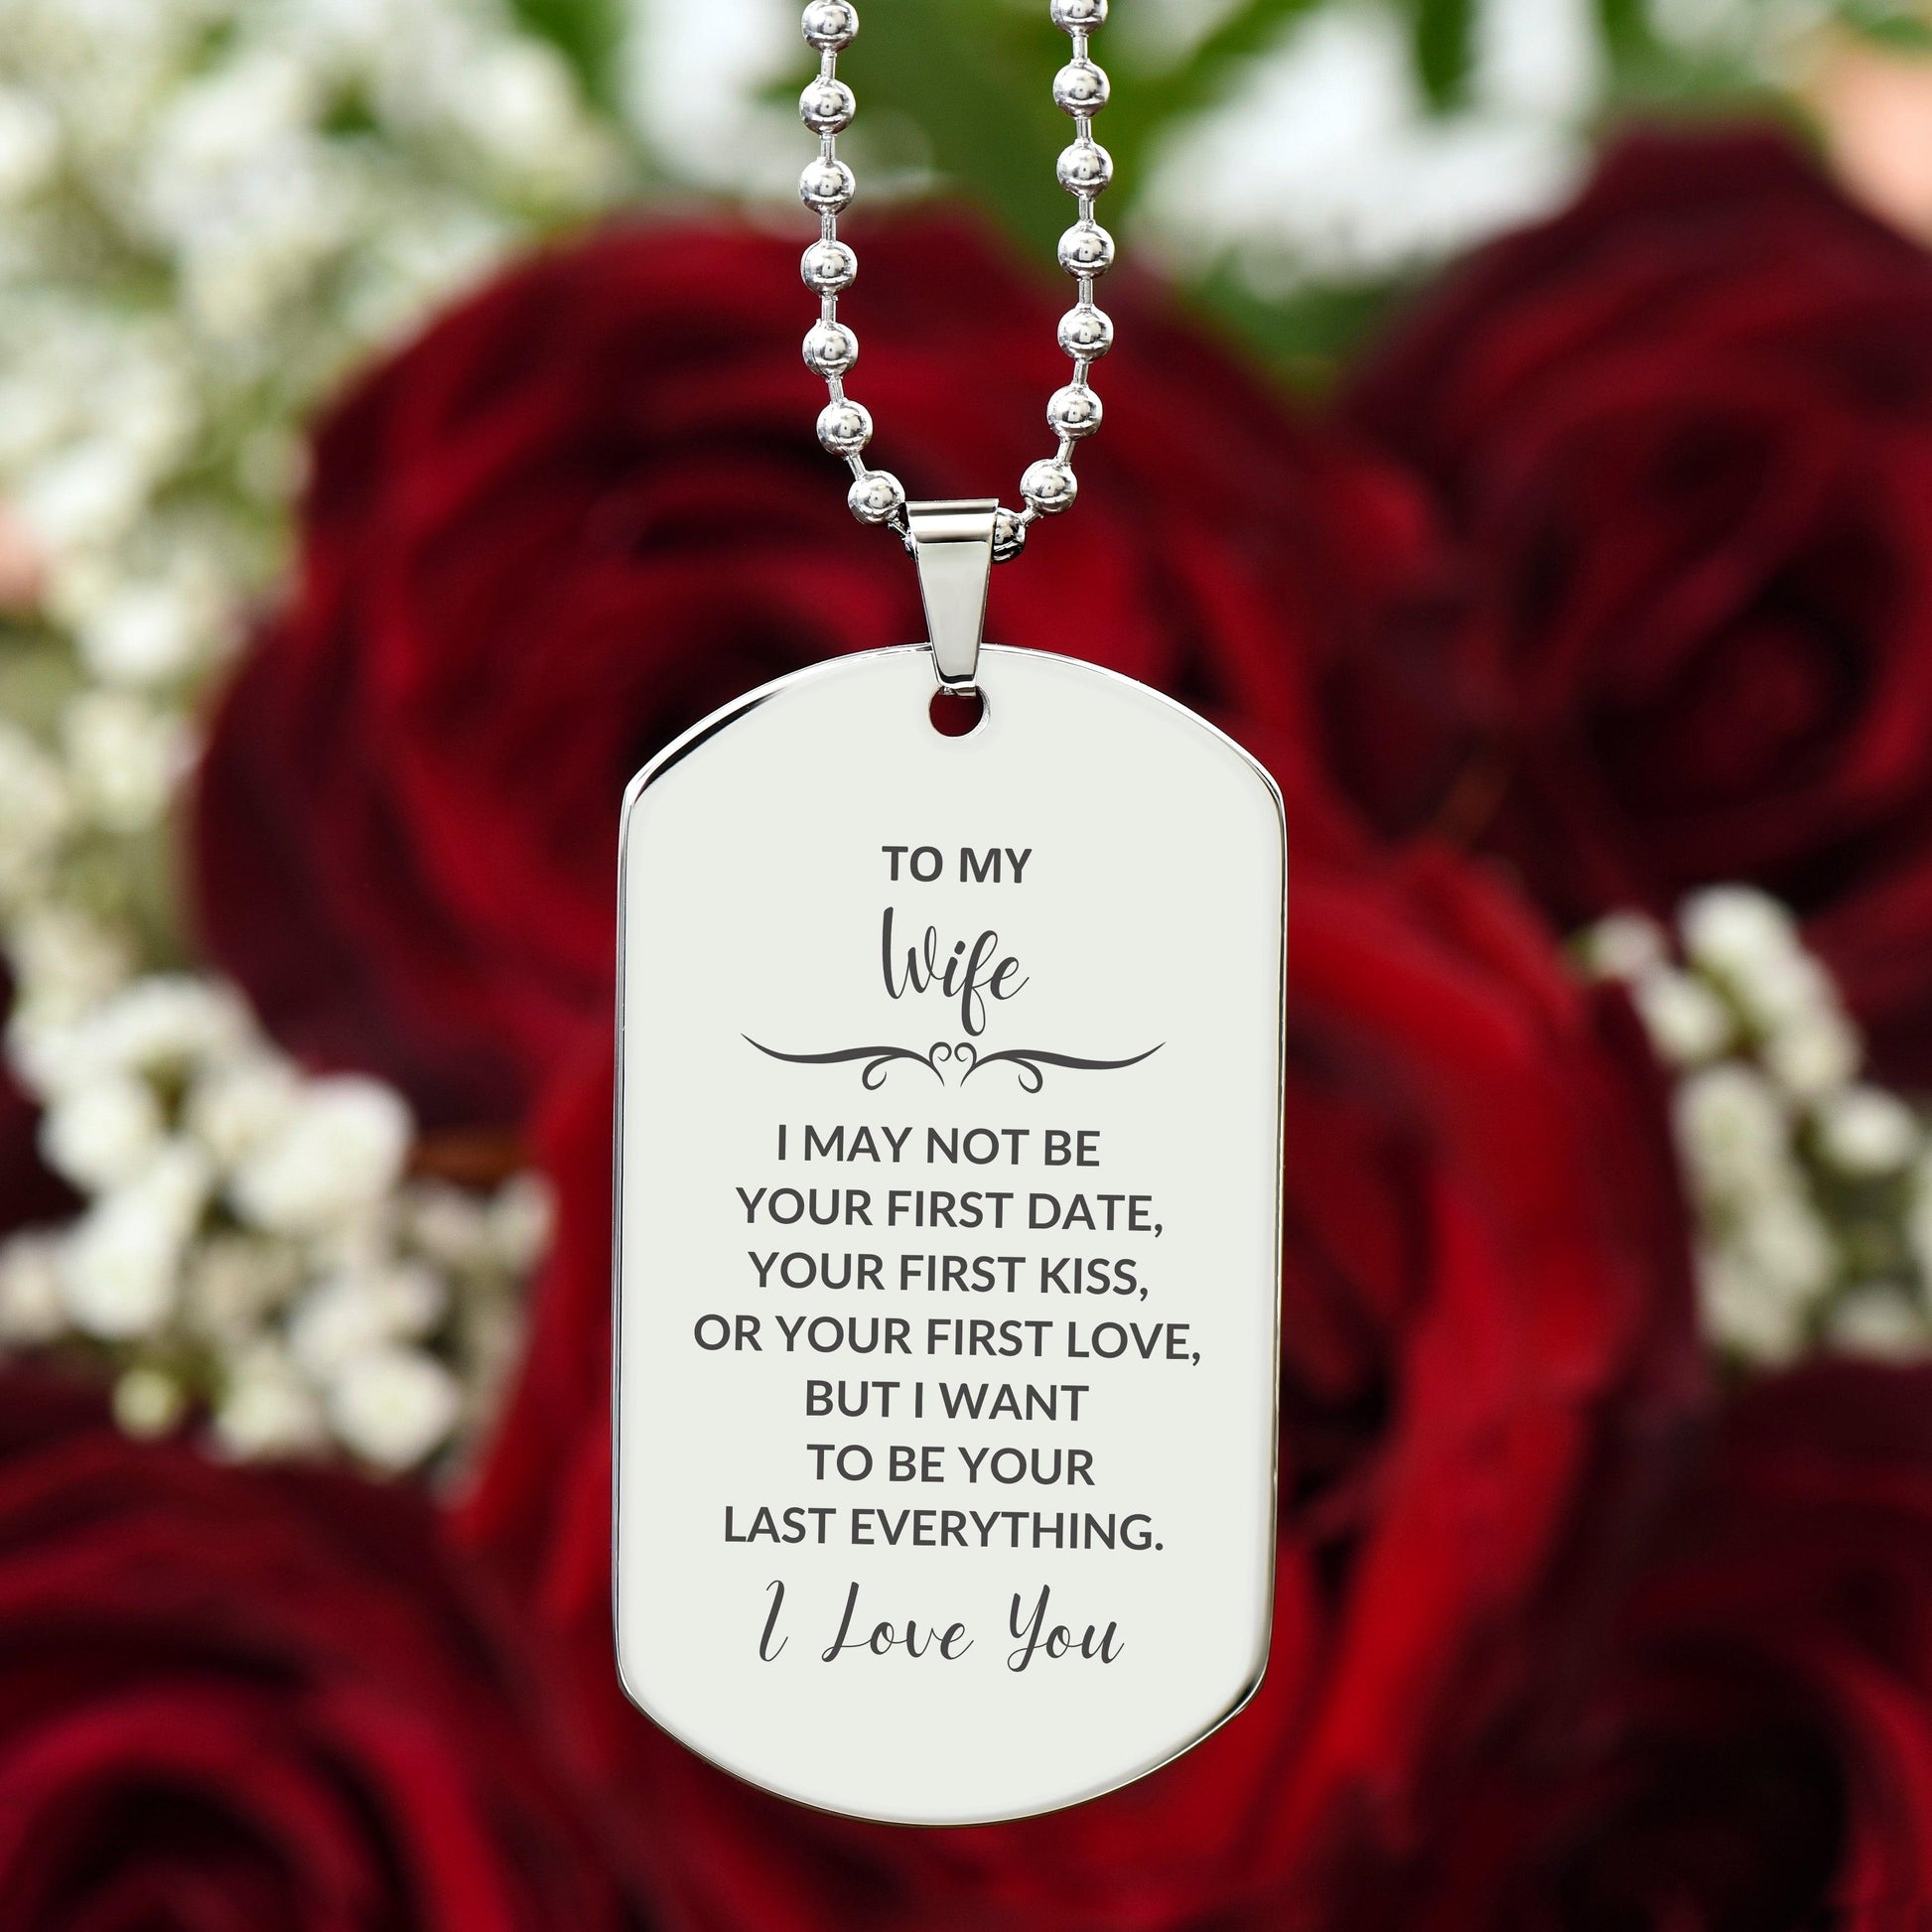 To My Wife I Want to Be Your Last Everything Engraved Silver Dog Tag Necklace Romantic Valentine Gift - Mallard Moon Gift Shop